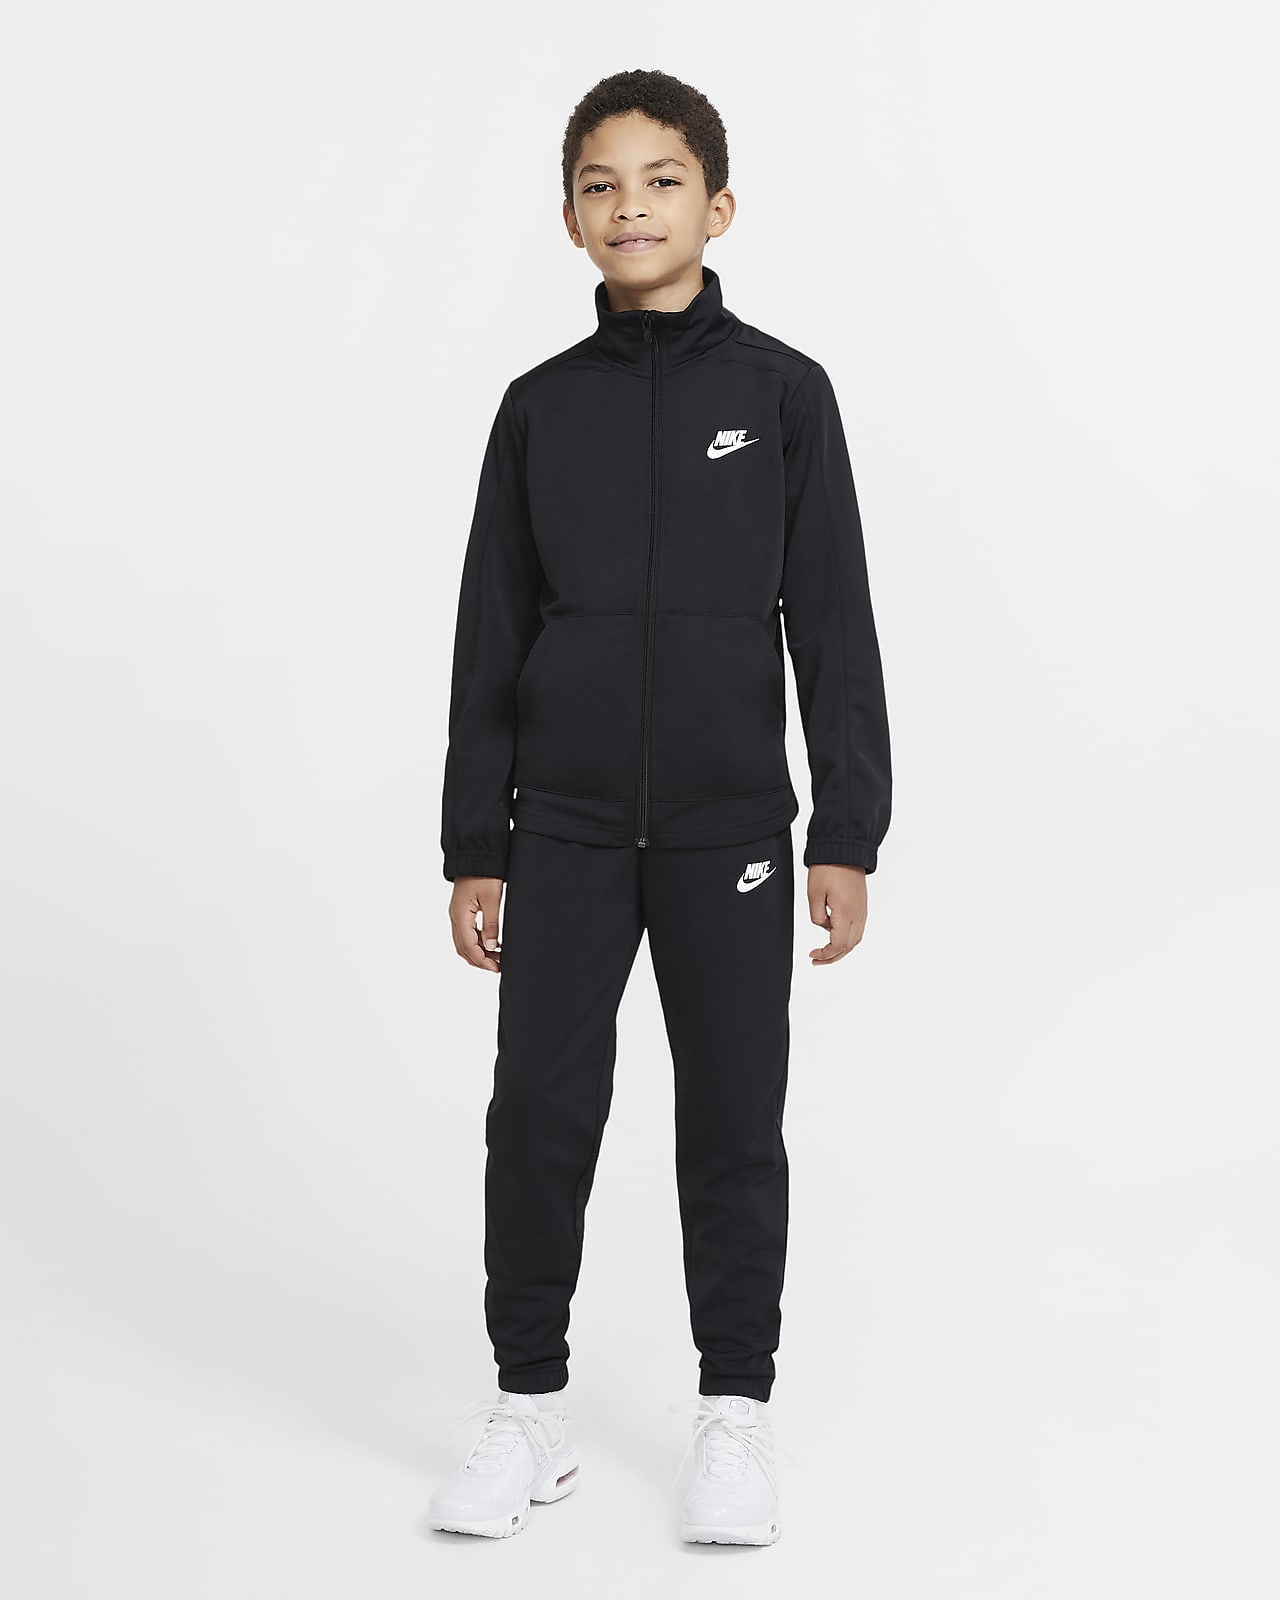 nike track suit for kids